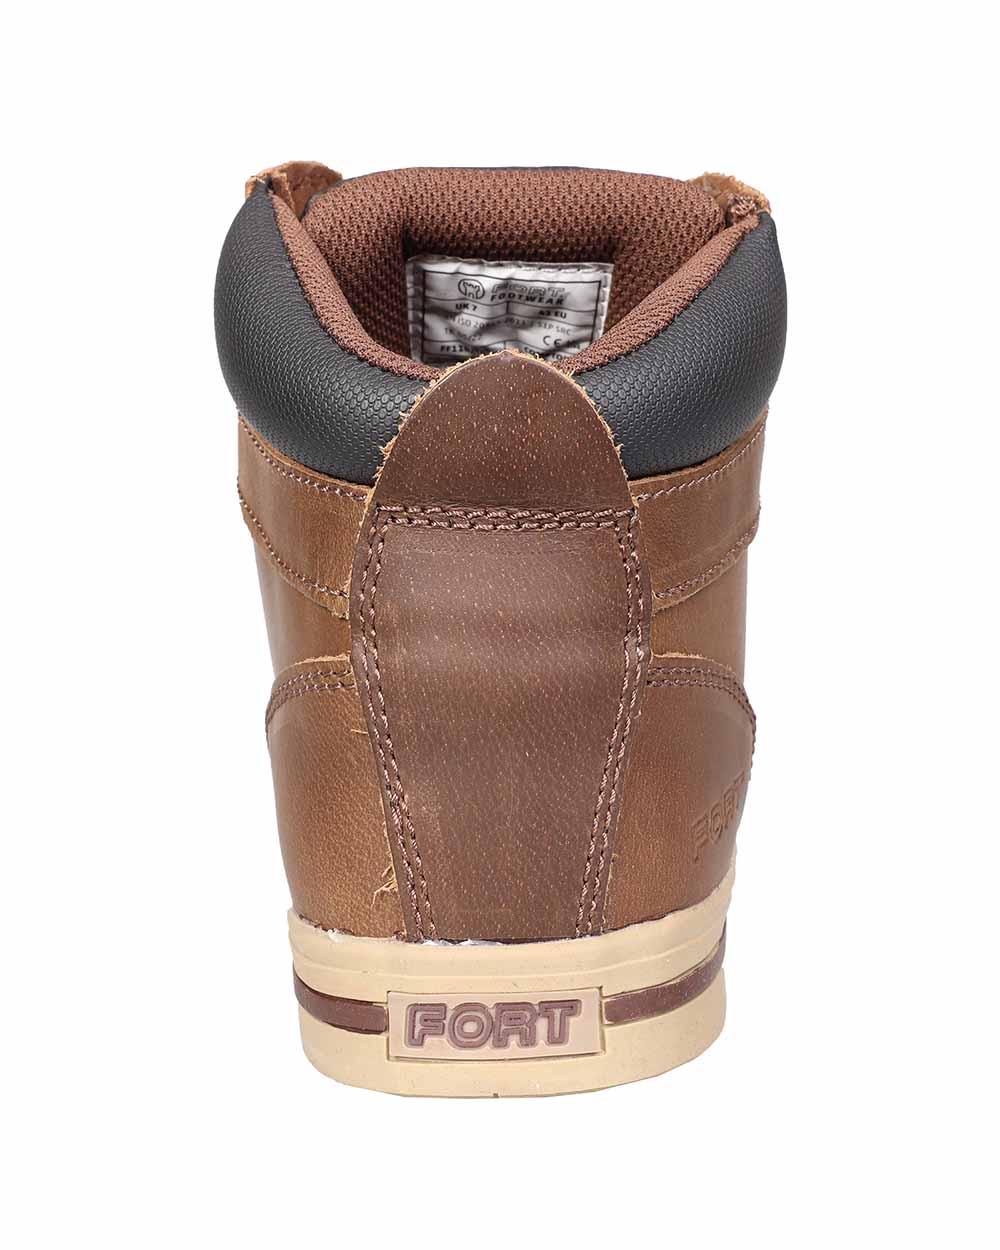 Fort Compton Safety Boot 